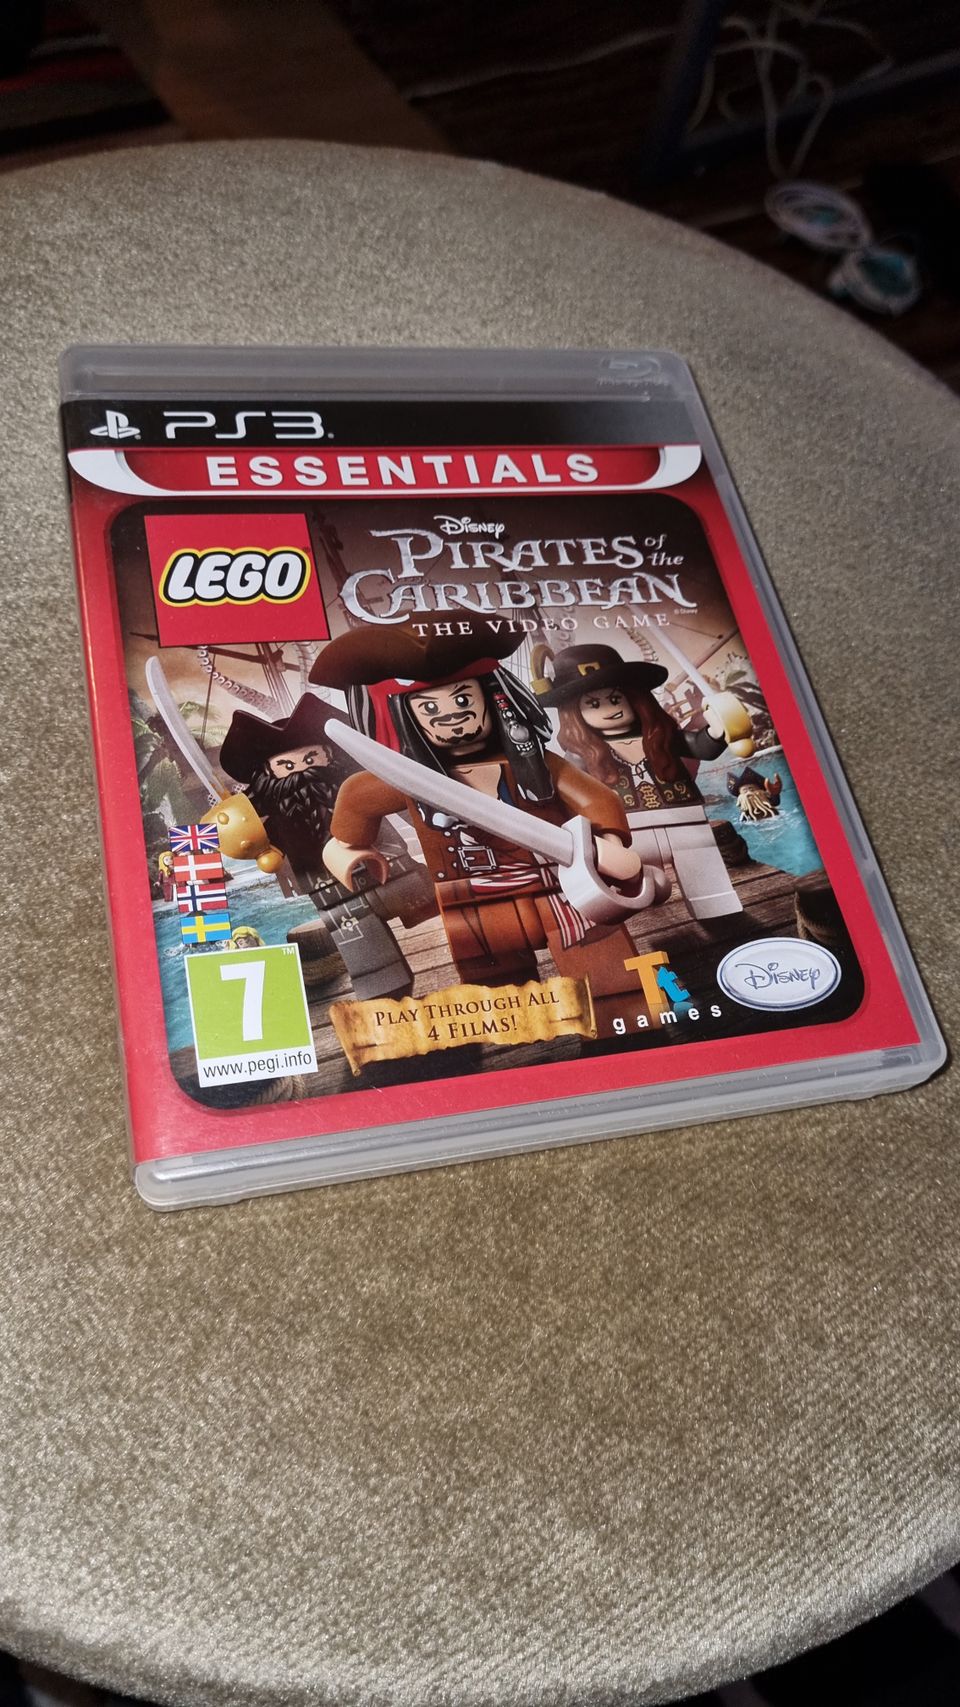 PS3/Playstation 3: Lego Disney Pirates of the Caribbean